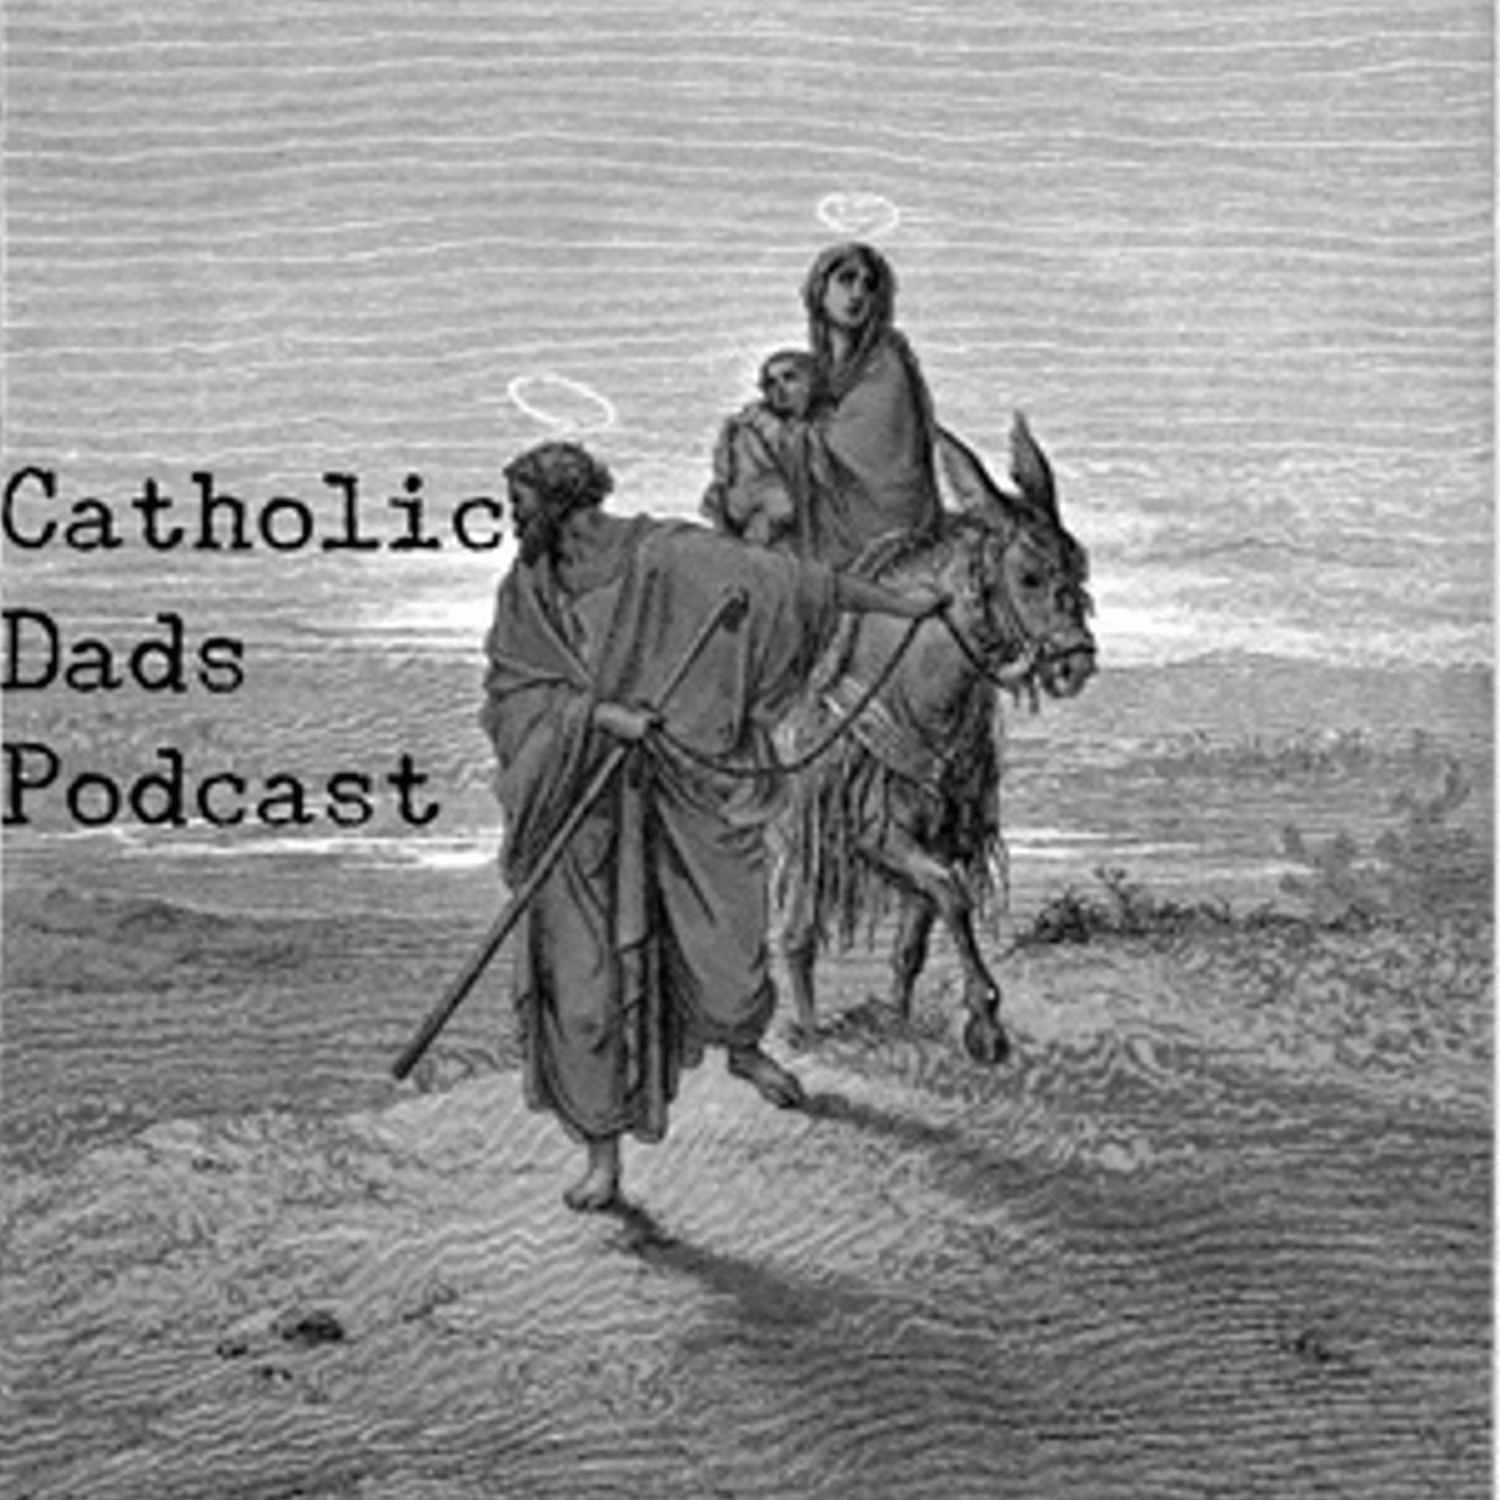 Catholic Dads Podcast 036 - The Problem with Porn